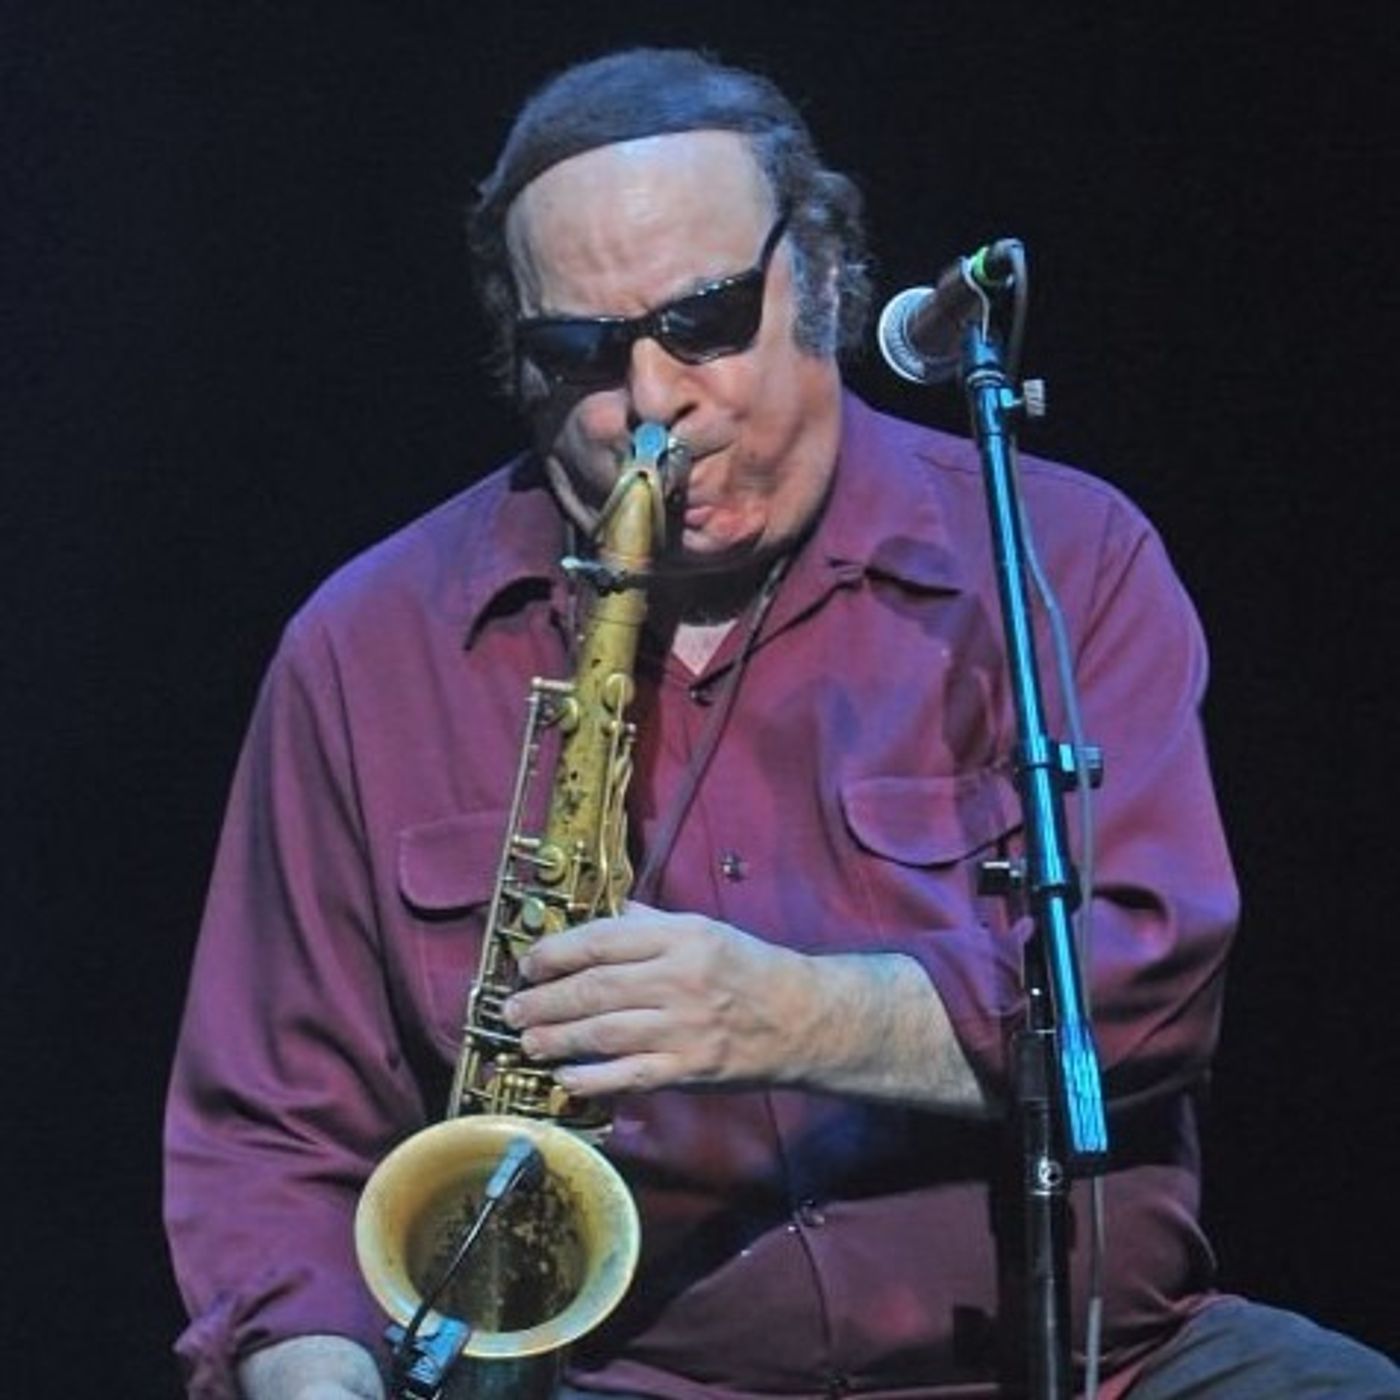 Arno Hecht - Saxophone Star With The Uptown Horns. Has Played With Ray Charles, The Rolling Stones, J. Geils, The B-52s, James Brown And More!